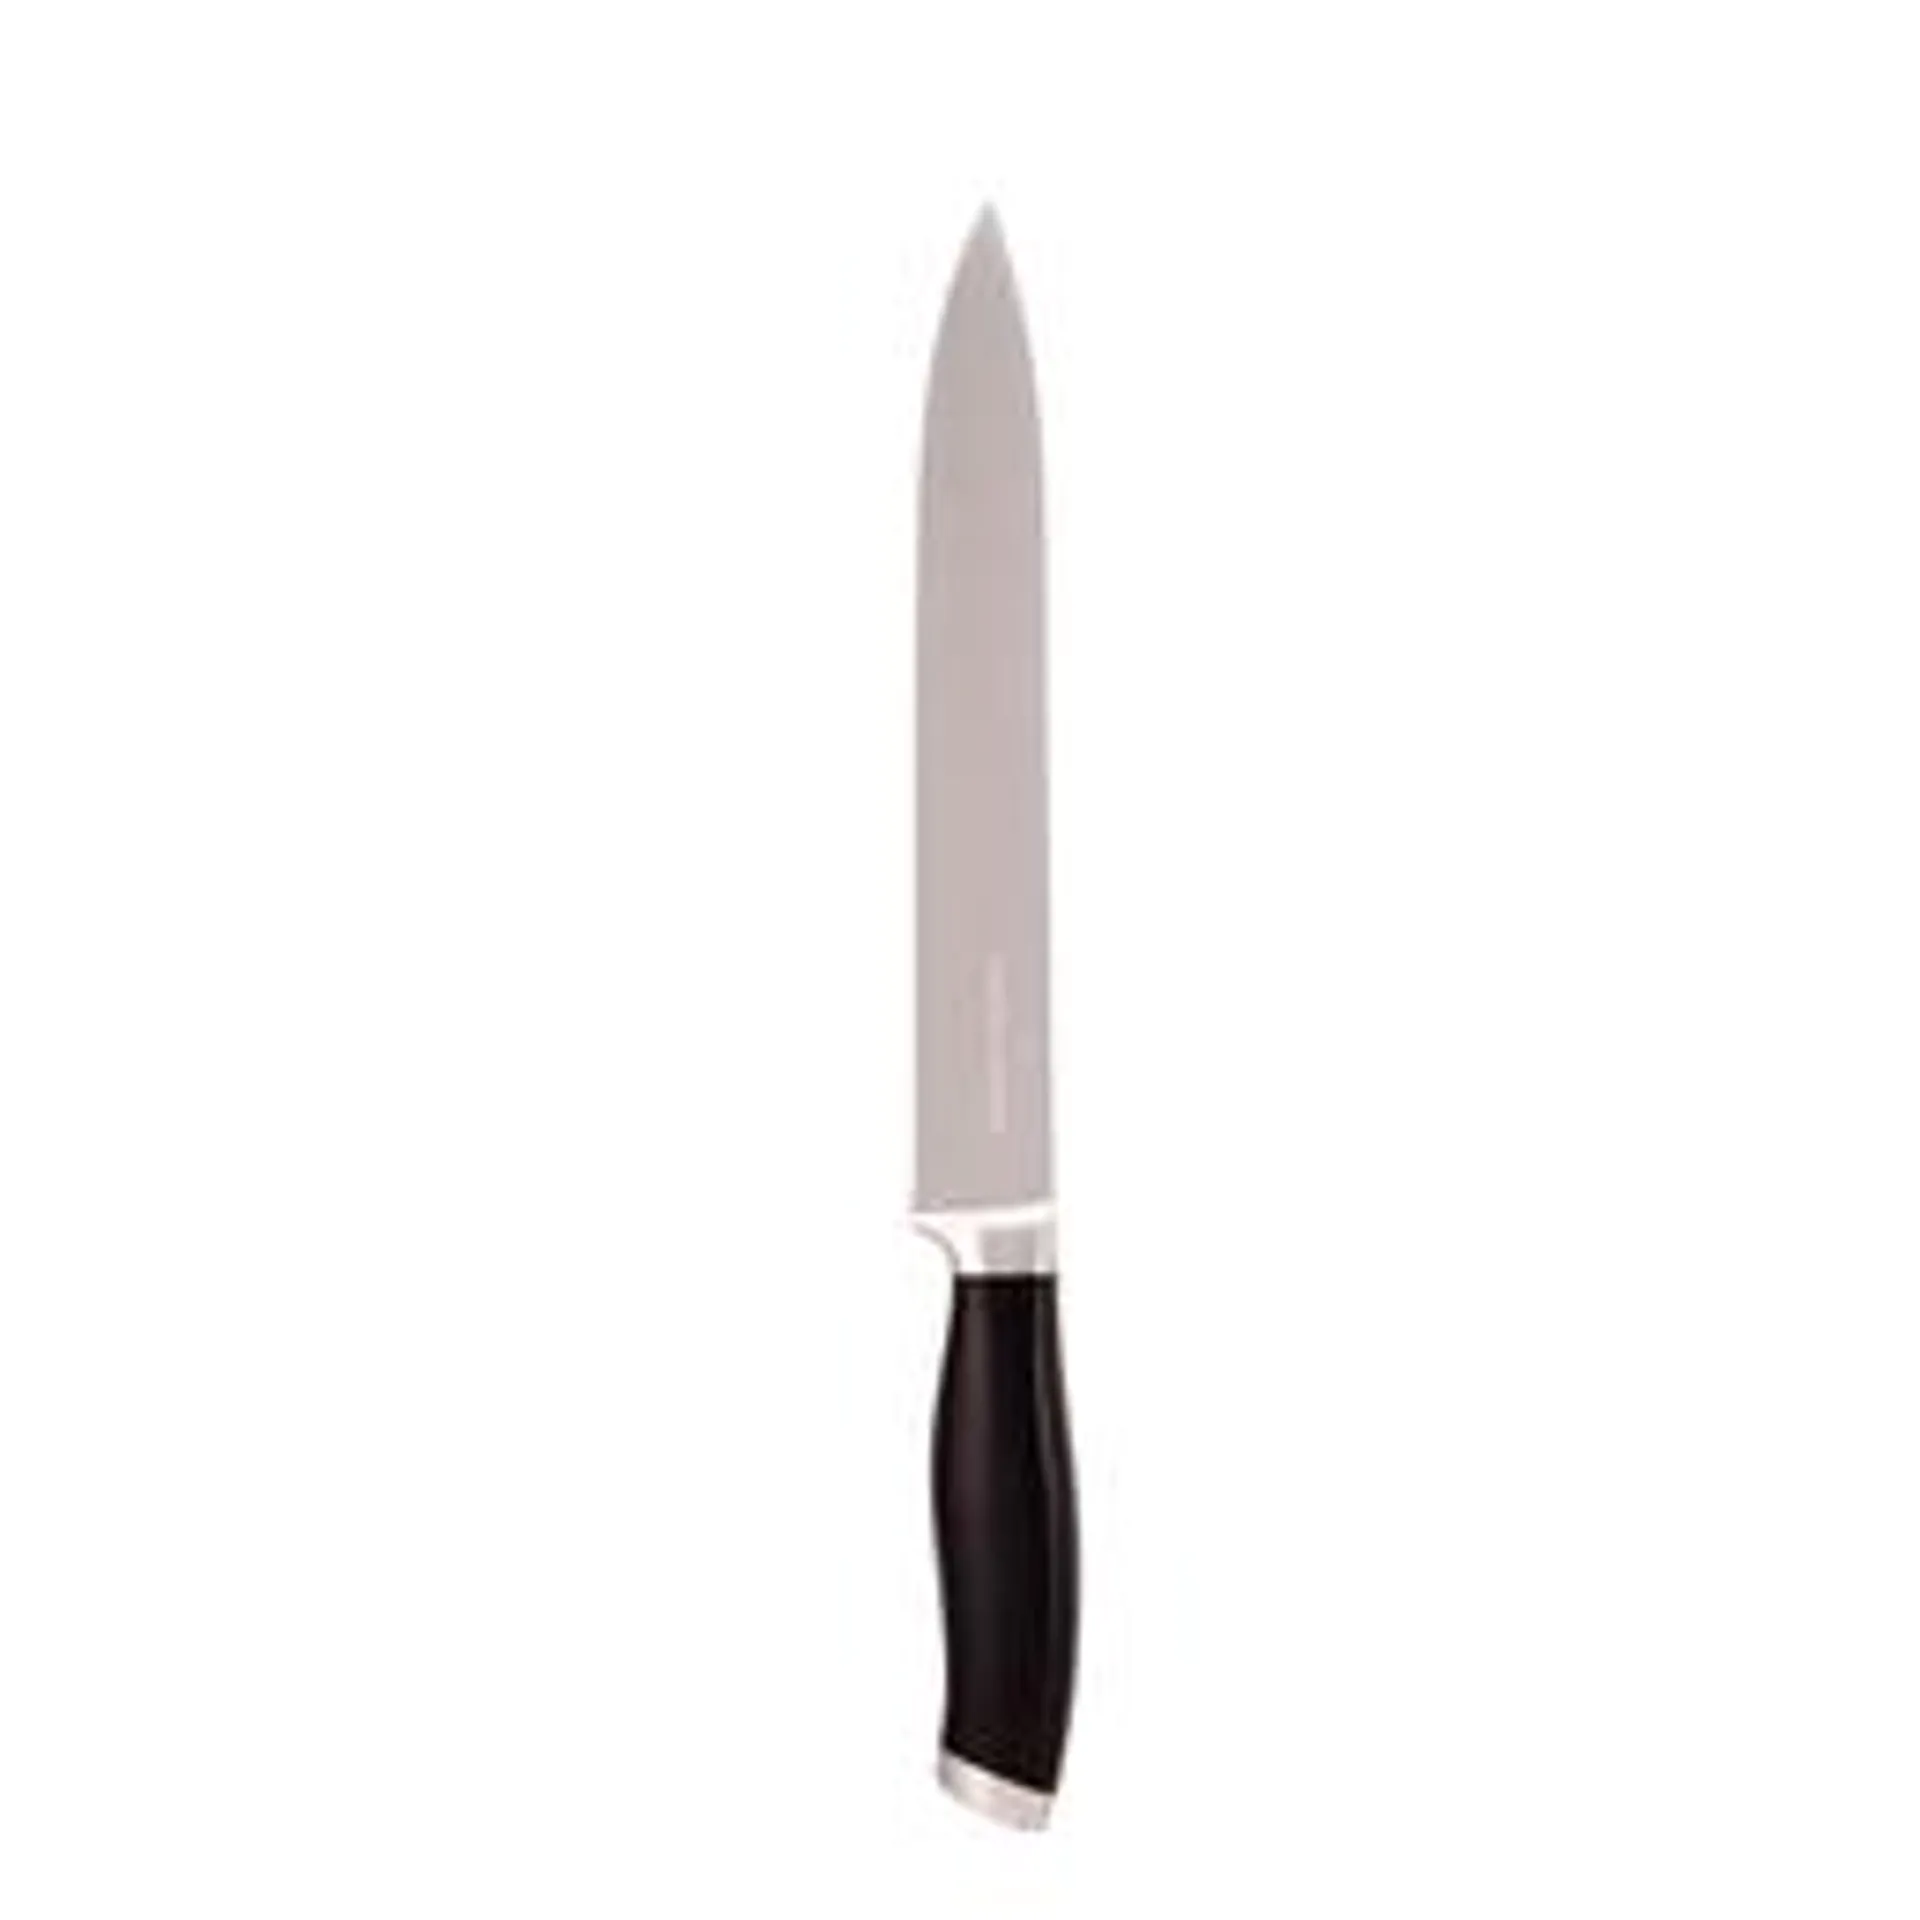 Capital Kitchen Everyday Carving Knife, 7.5"